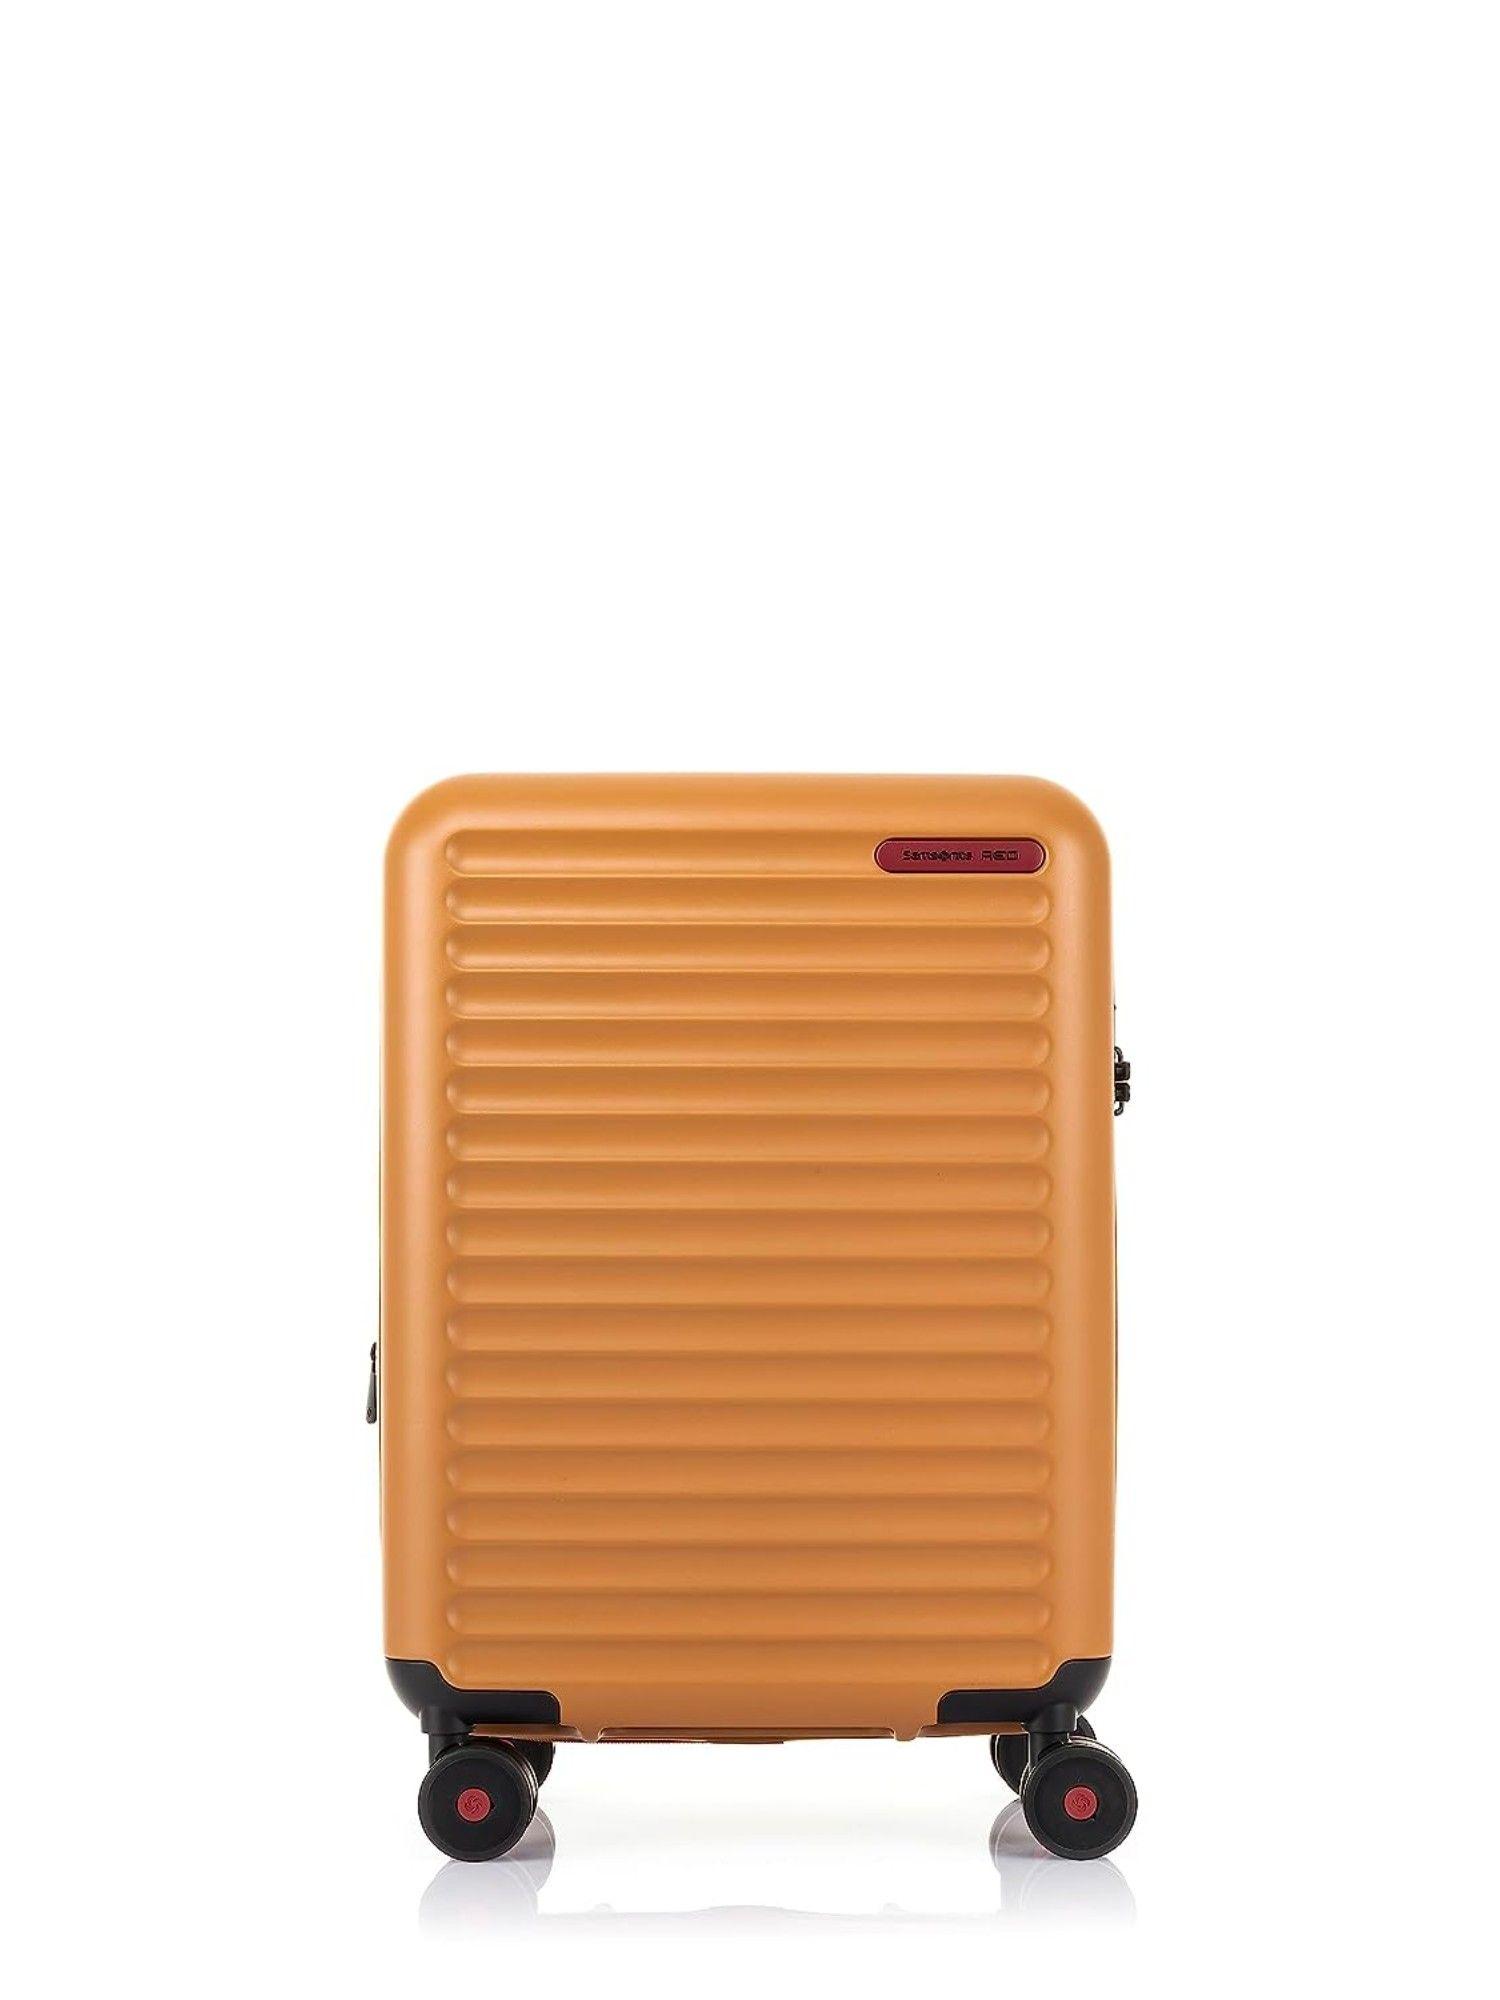 suitcase trolley bag for travel | toiis c 55 cms polycarbonate hardsided small cabin luggage trolley bag